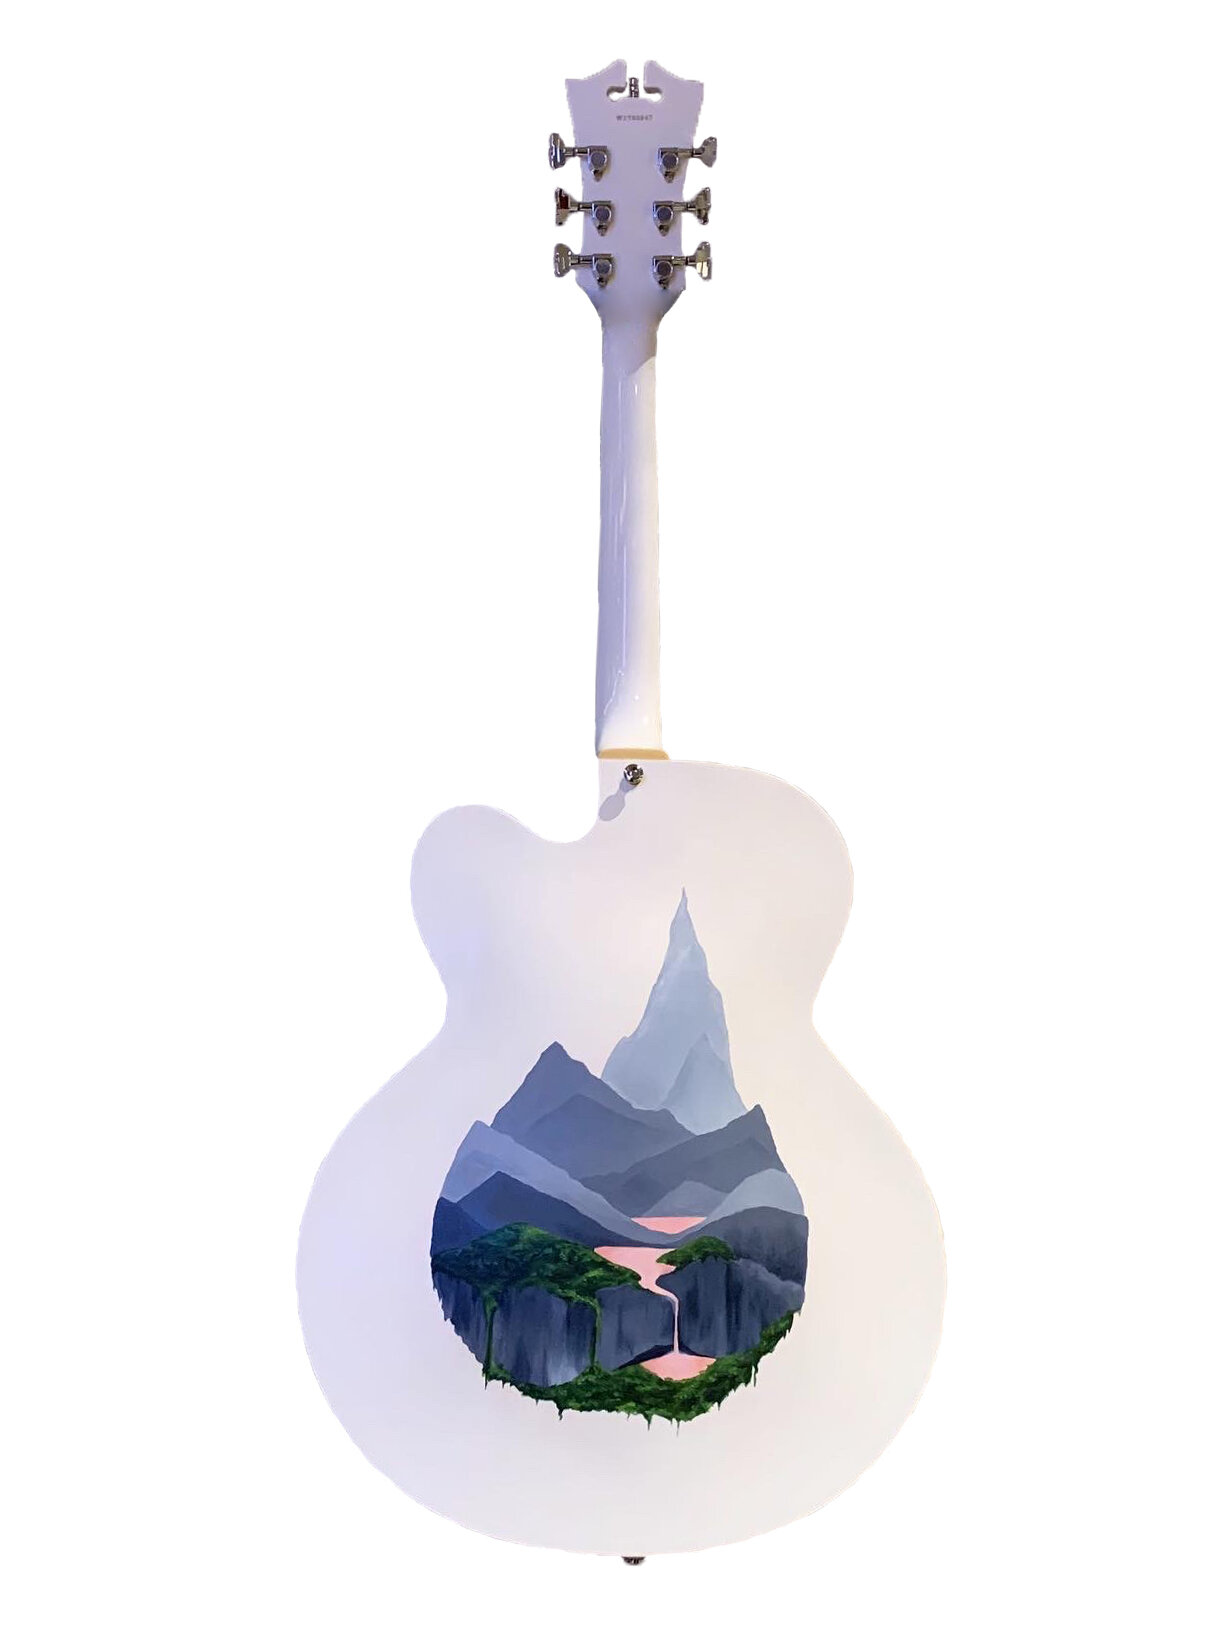   Lense II , 2019  oil on D’Angelico guitar  48 x 17 x 10 inches   